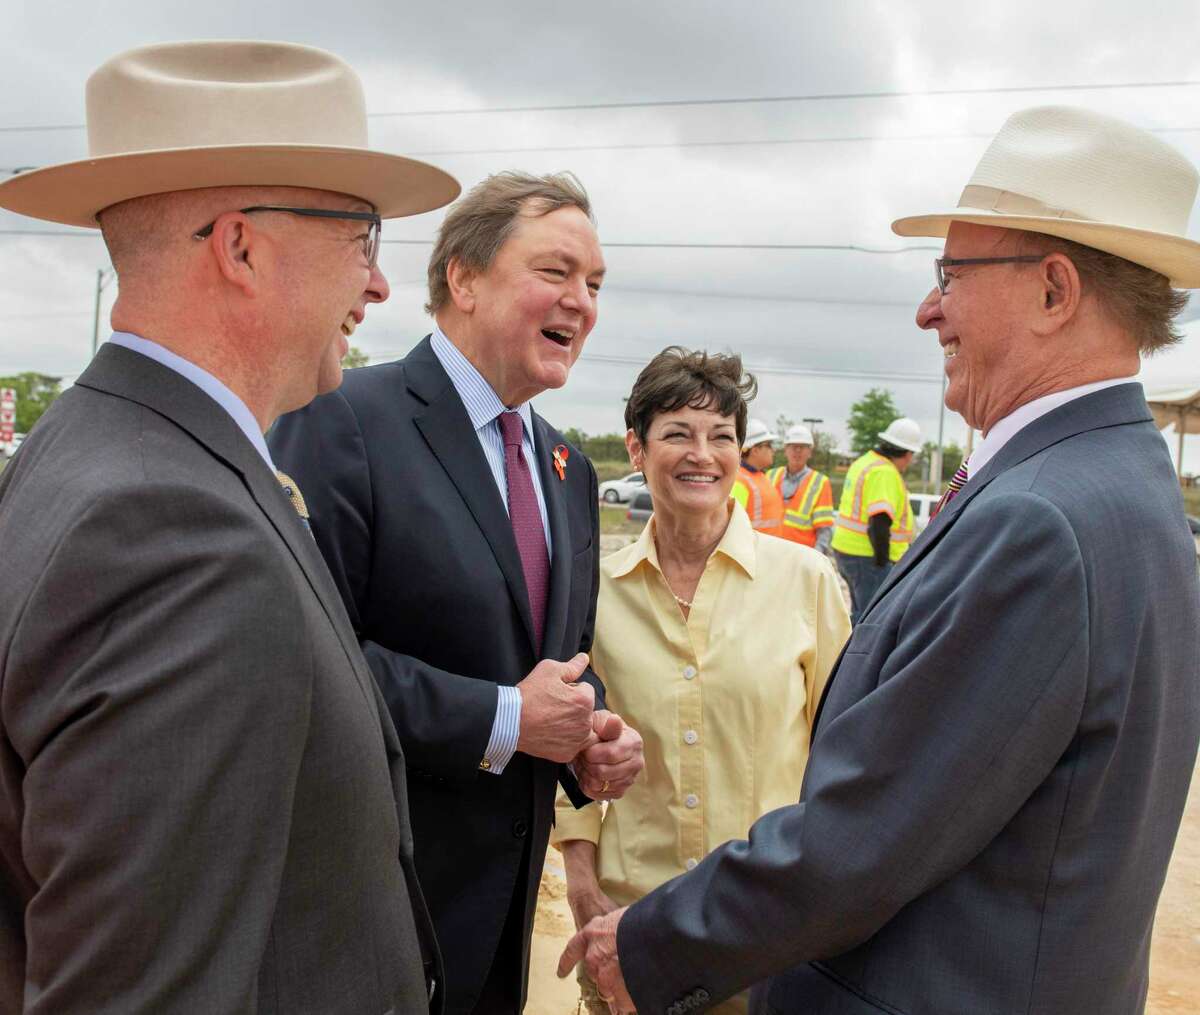 Bexar County Commissioner Kevin Wolff, from left, Texas Transportation Commission Chairman J. Bruce Bugg Jr., state Sen. Donna Campbell and Bexar County Judge Nelson Wolff talk during a March 2019 groundbreaking on a U.S. 281 construction project. “I’m a preacher of relationships,” Bugg says. “Those relationships were built by the ability to really sit down and communicate.”